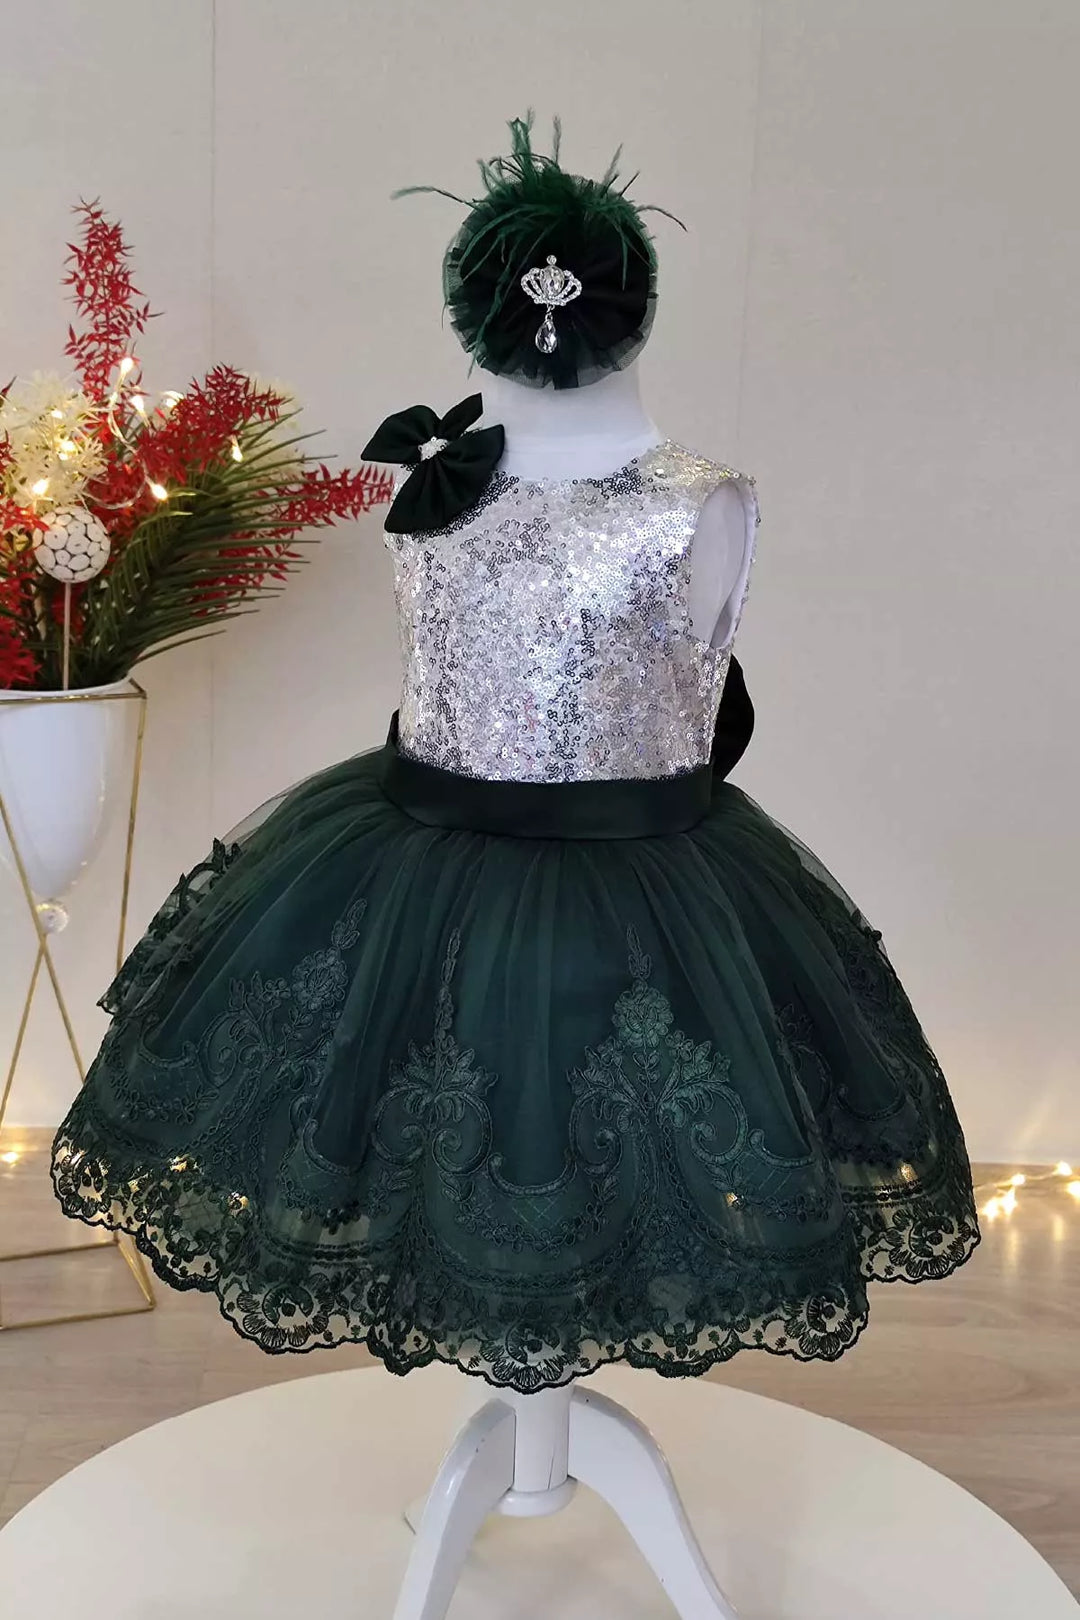 Emerald party dress